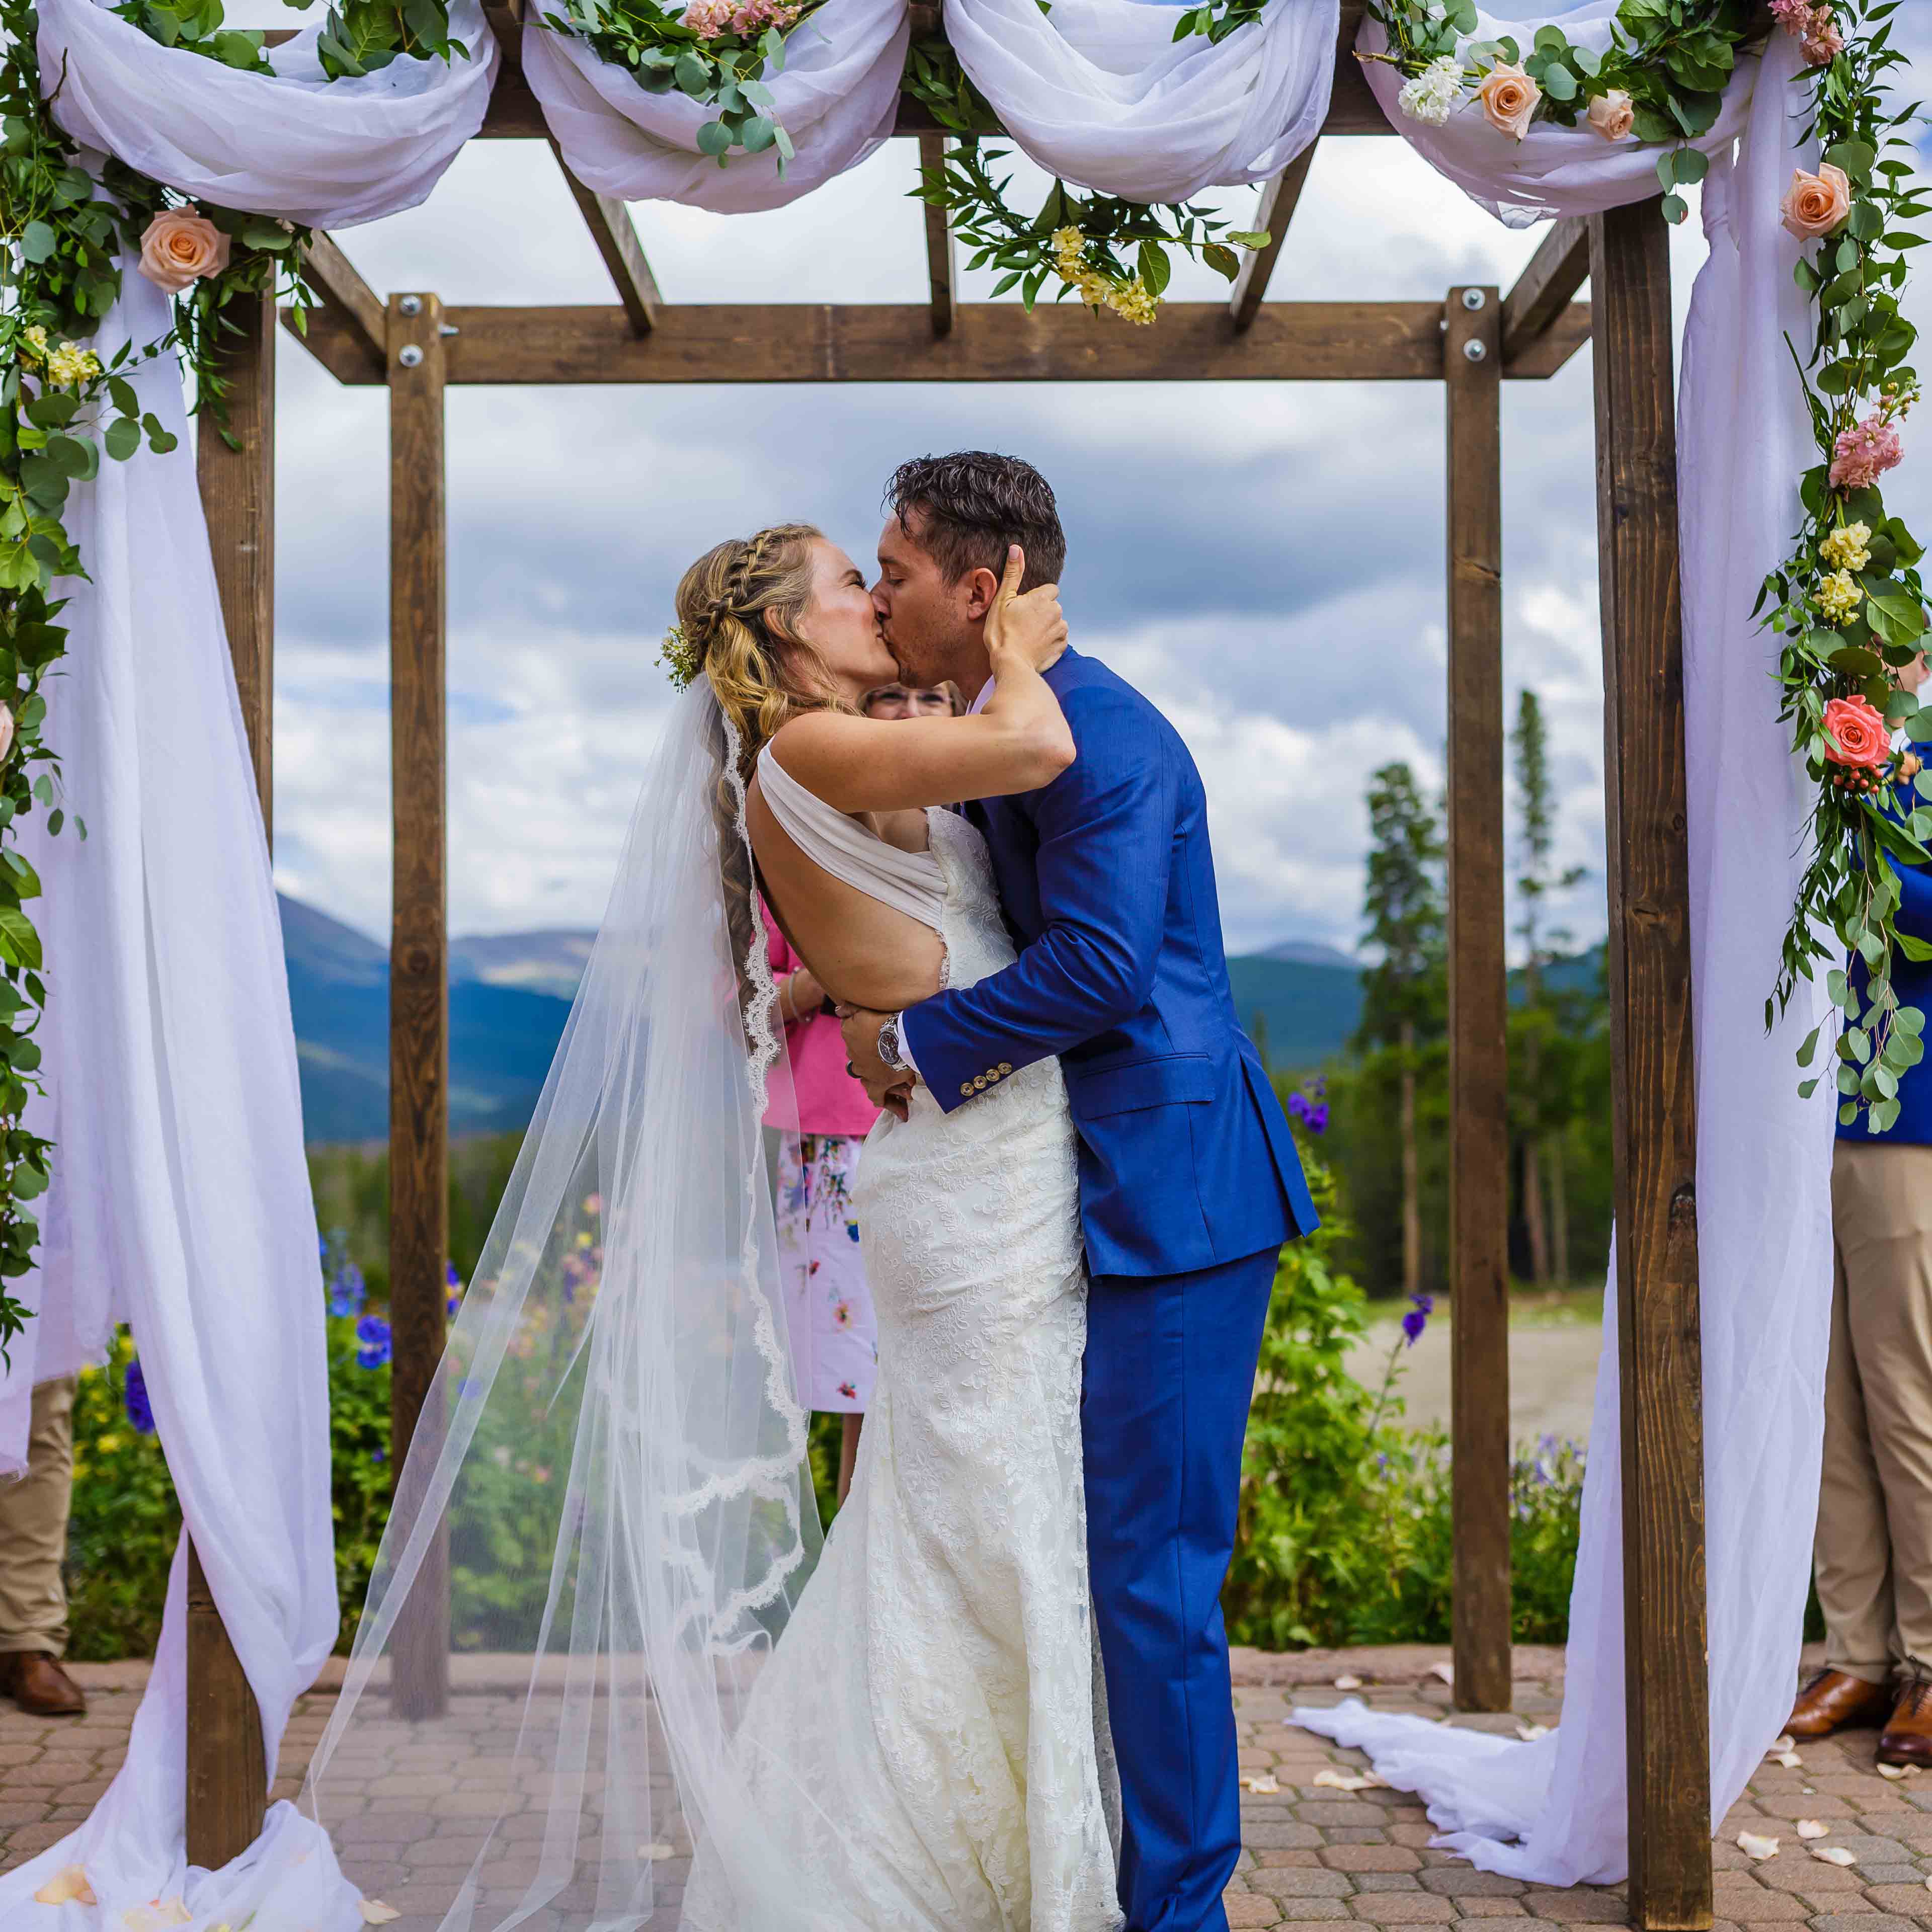 bright wedding photography, Breckenridge wedding planner, first kiss, outdoor ceremony under chuppah at ten mile station, mountain wedding inspiration